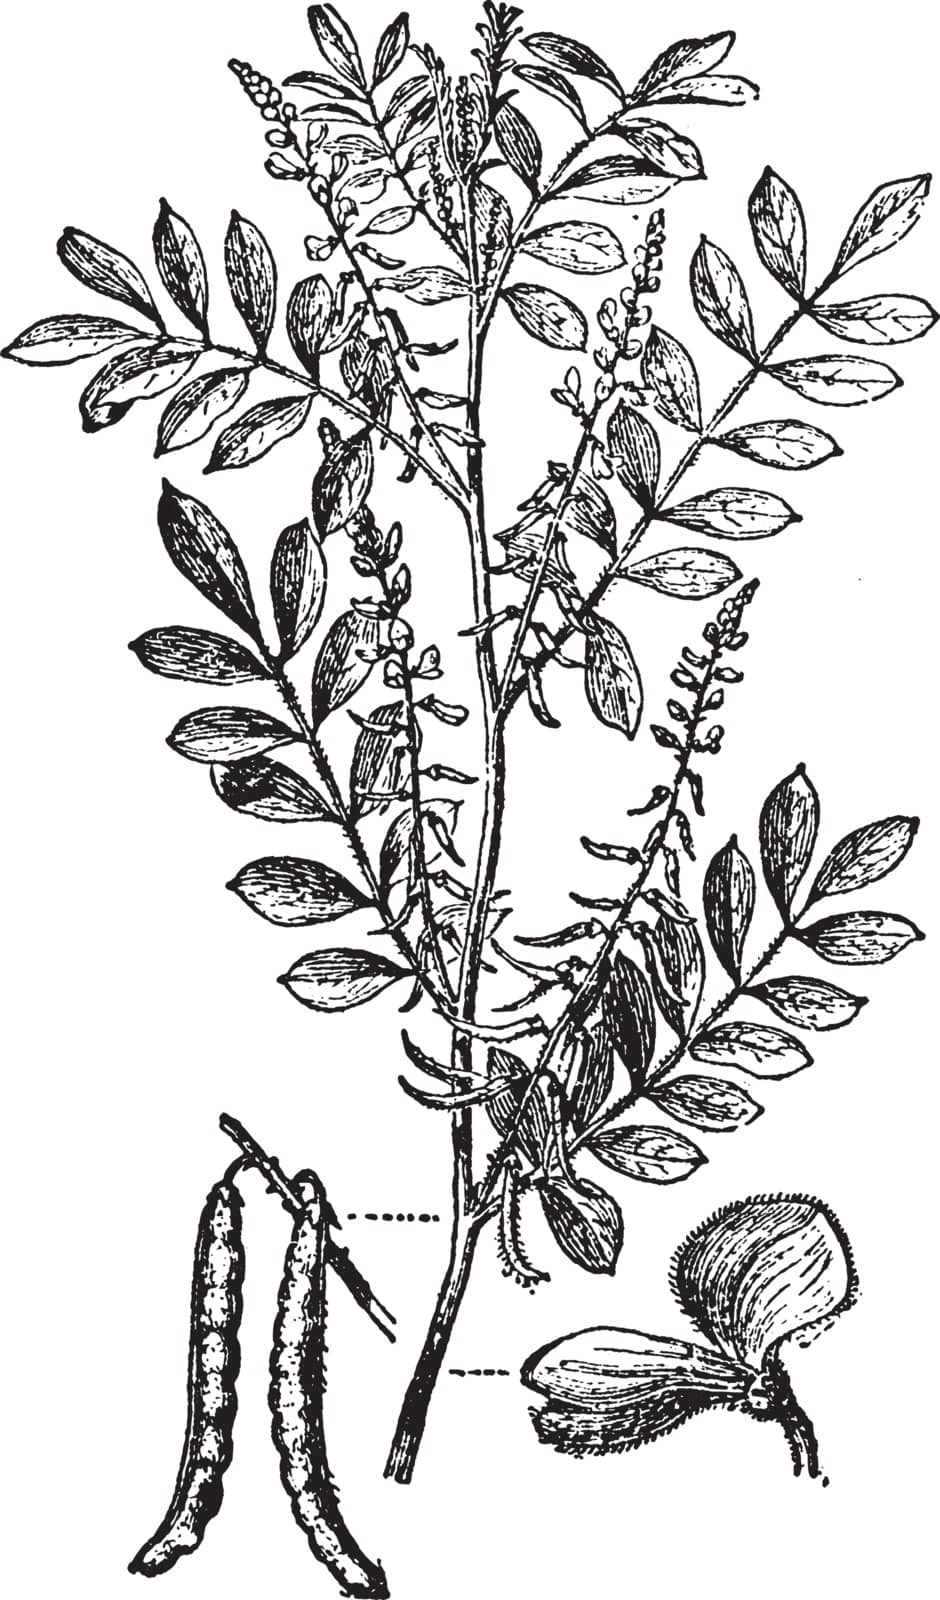 This plant has pinnate leaves and has clusters of usually red or purple flowers. It is from Indigofera genus, vintage line drawing or engraving illustration.